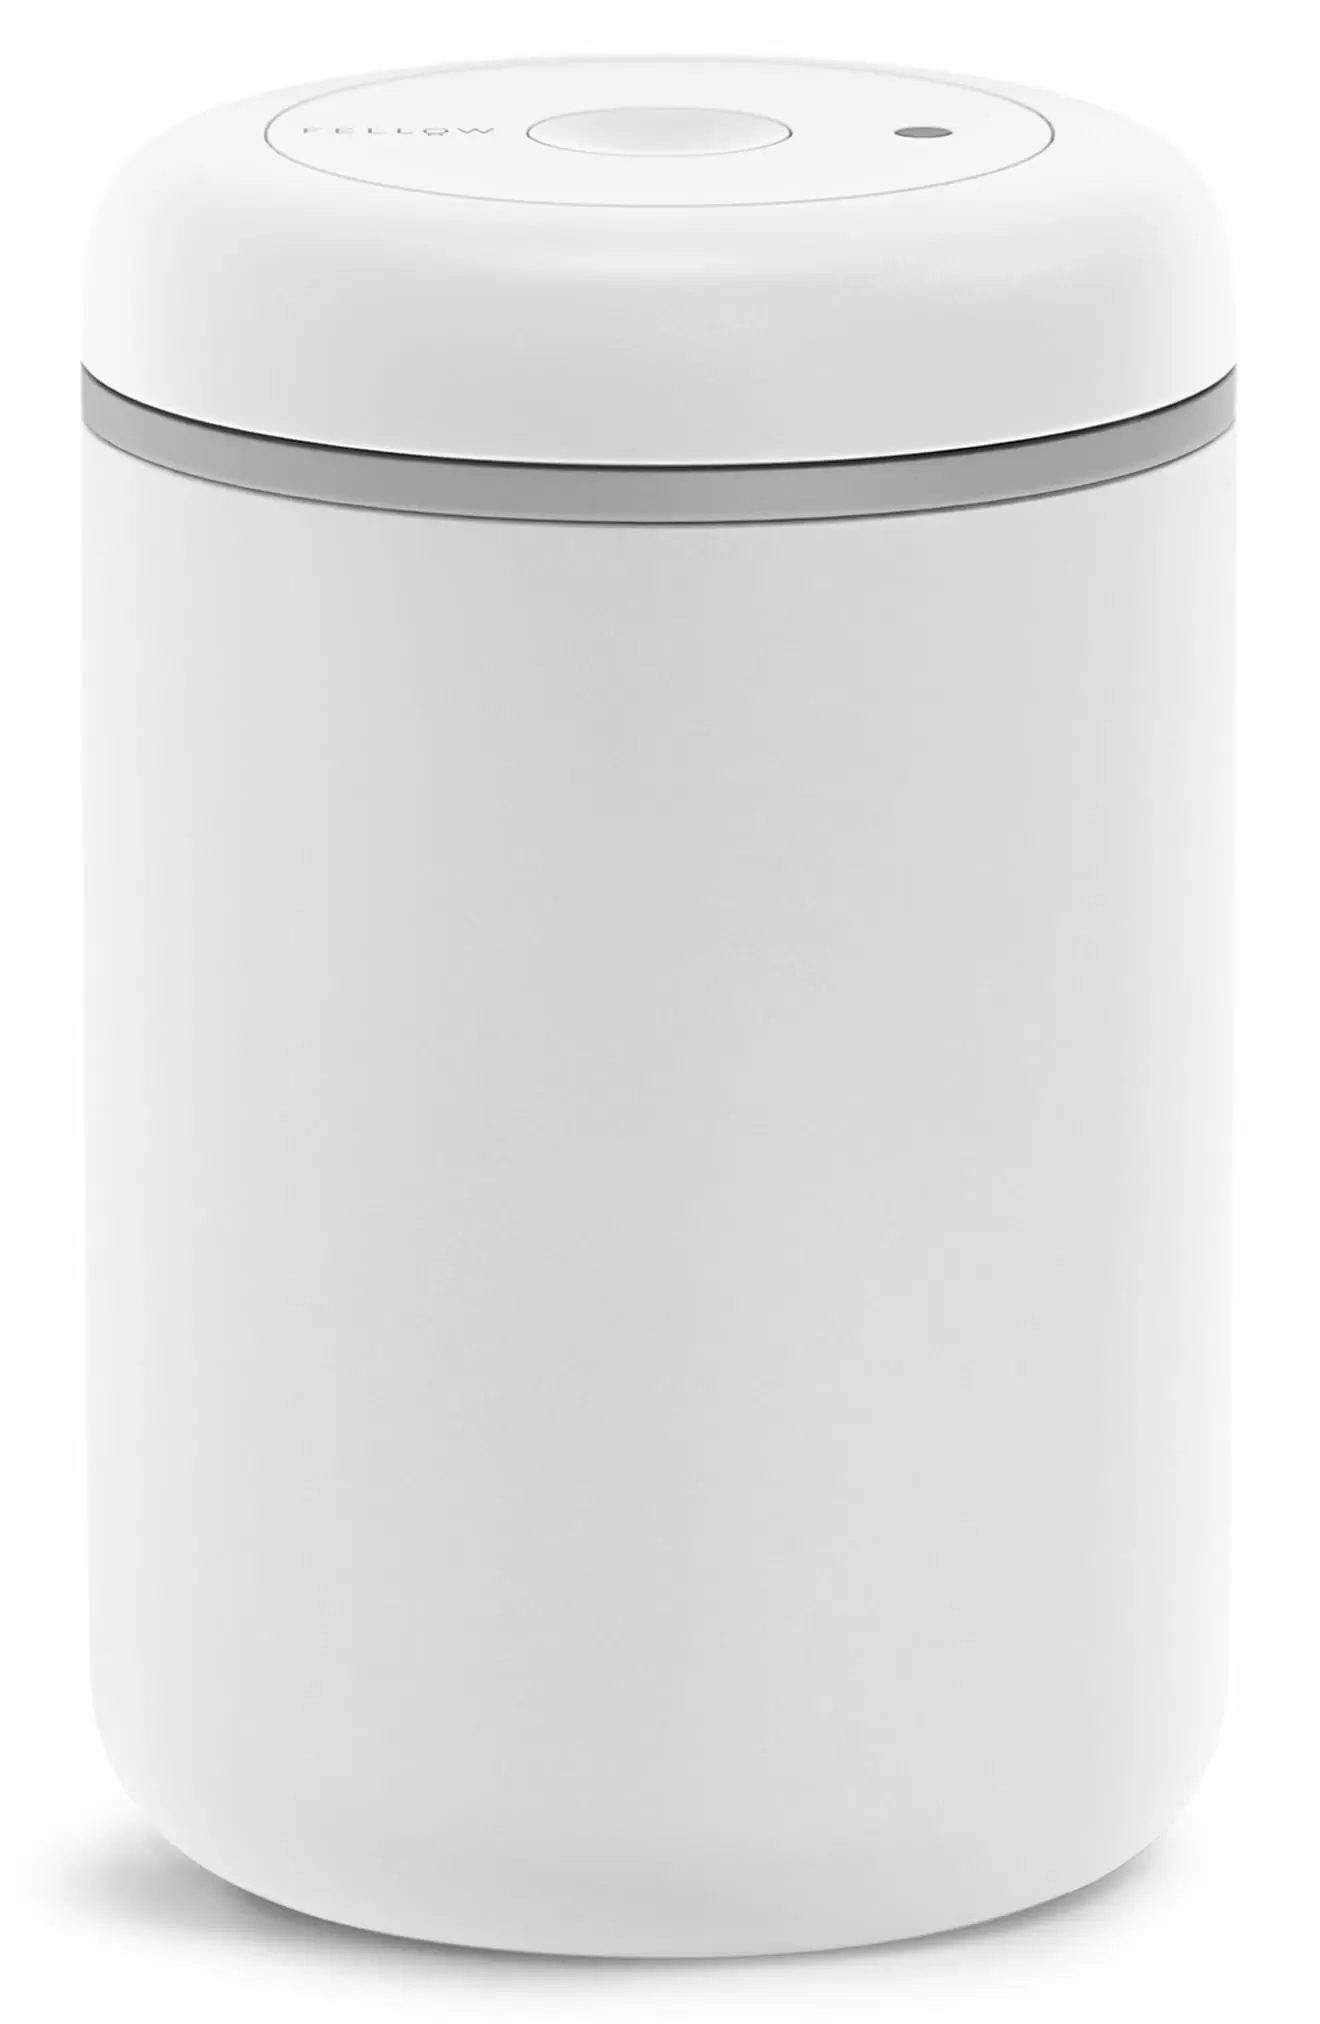 FELLOW Atmos Vacuum Canister in Matte White at Nordstrom, Size Large